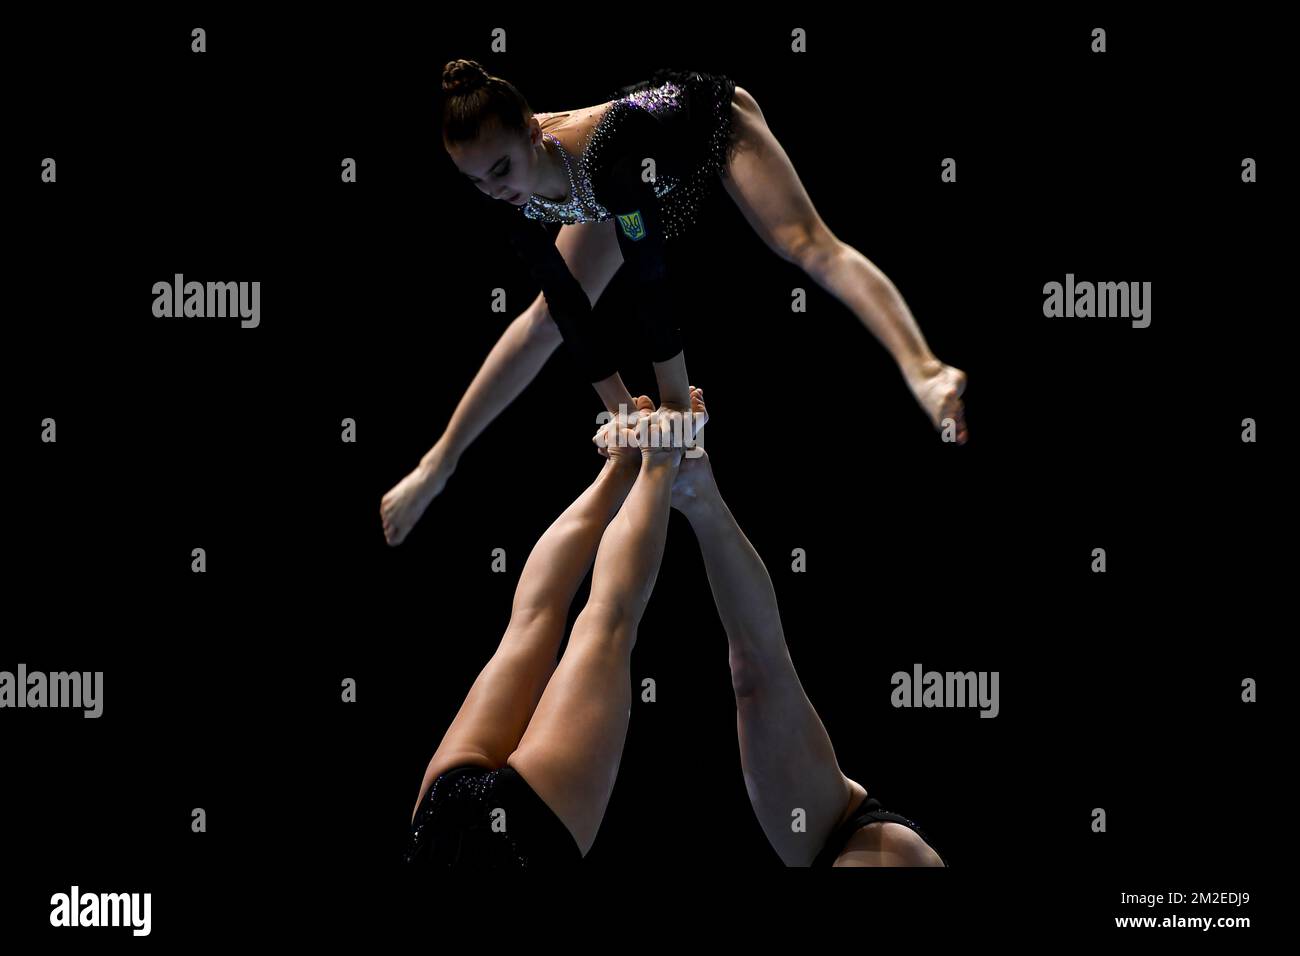 Ukraine group Nataliia Kolmohorova, Anhelina Kozolup and Kateryna Shevchuk pictured in action during the second day of the 26th edition of the world championships acrobatic gymnastics in Antwerp, Saturday 14 April 2018. BELGA PHOTO DIRK WAEM Stock Photo